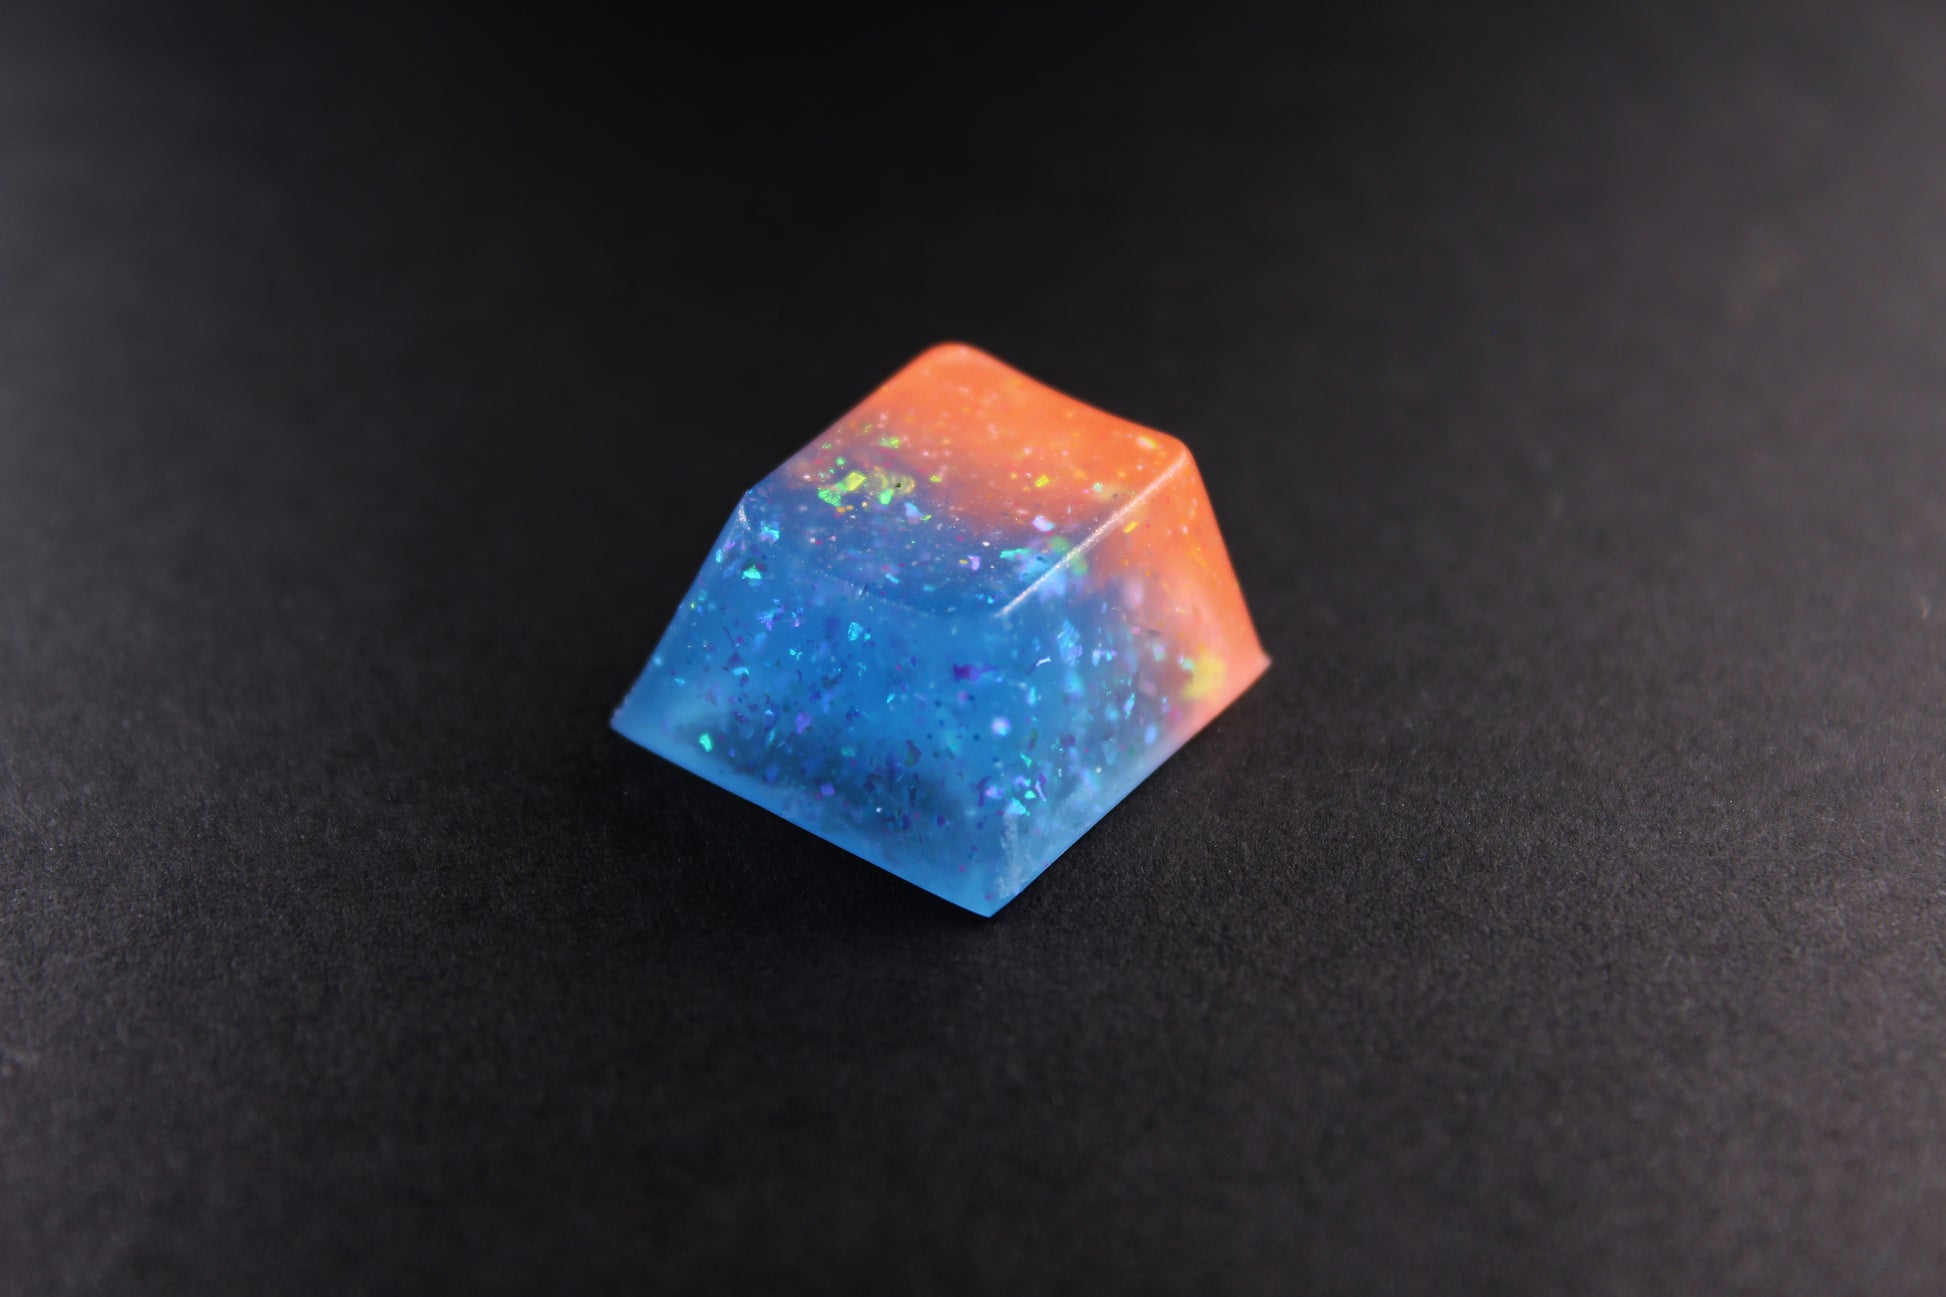 Cherry Esc - Elemental Glow - PrimeCaps Keycap - Blank and Sculpted Artisan Keycaps for cherry MX mechanical keyboards 